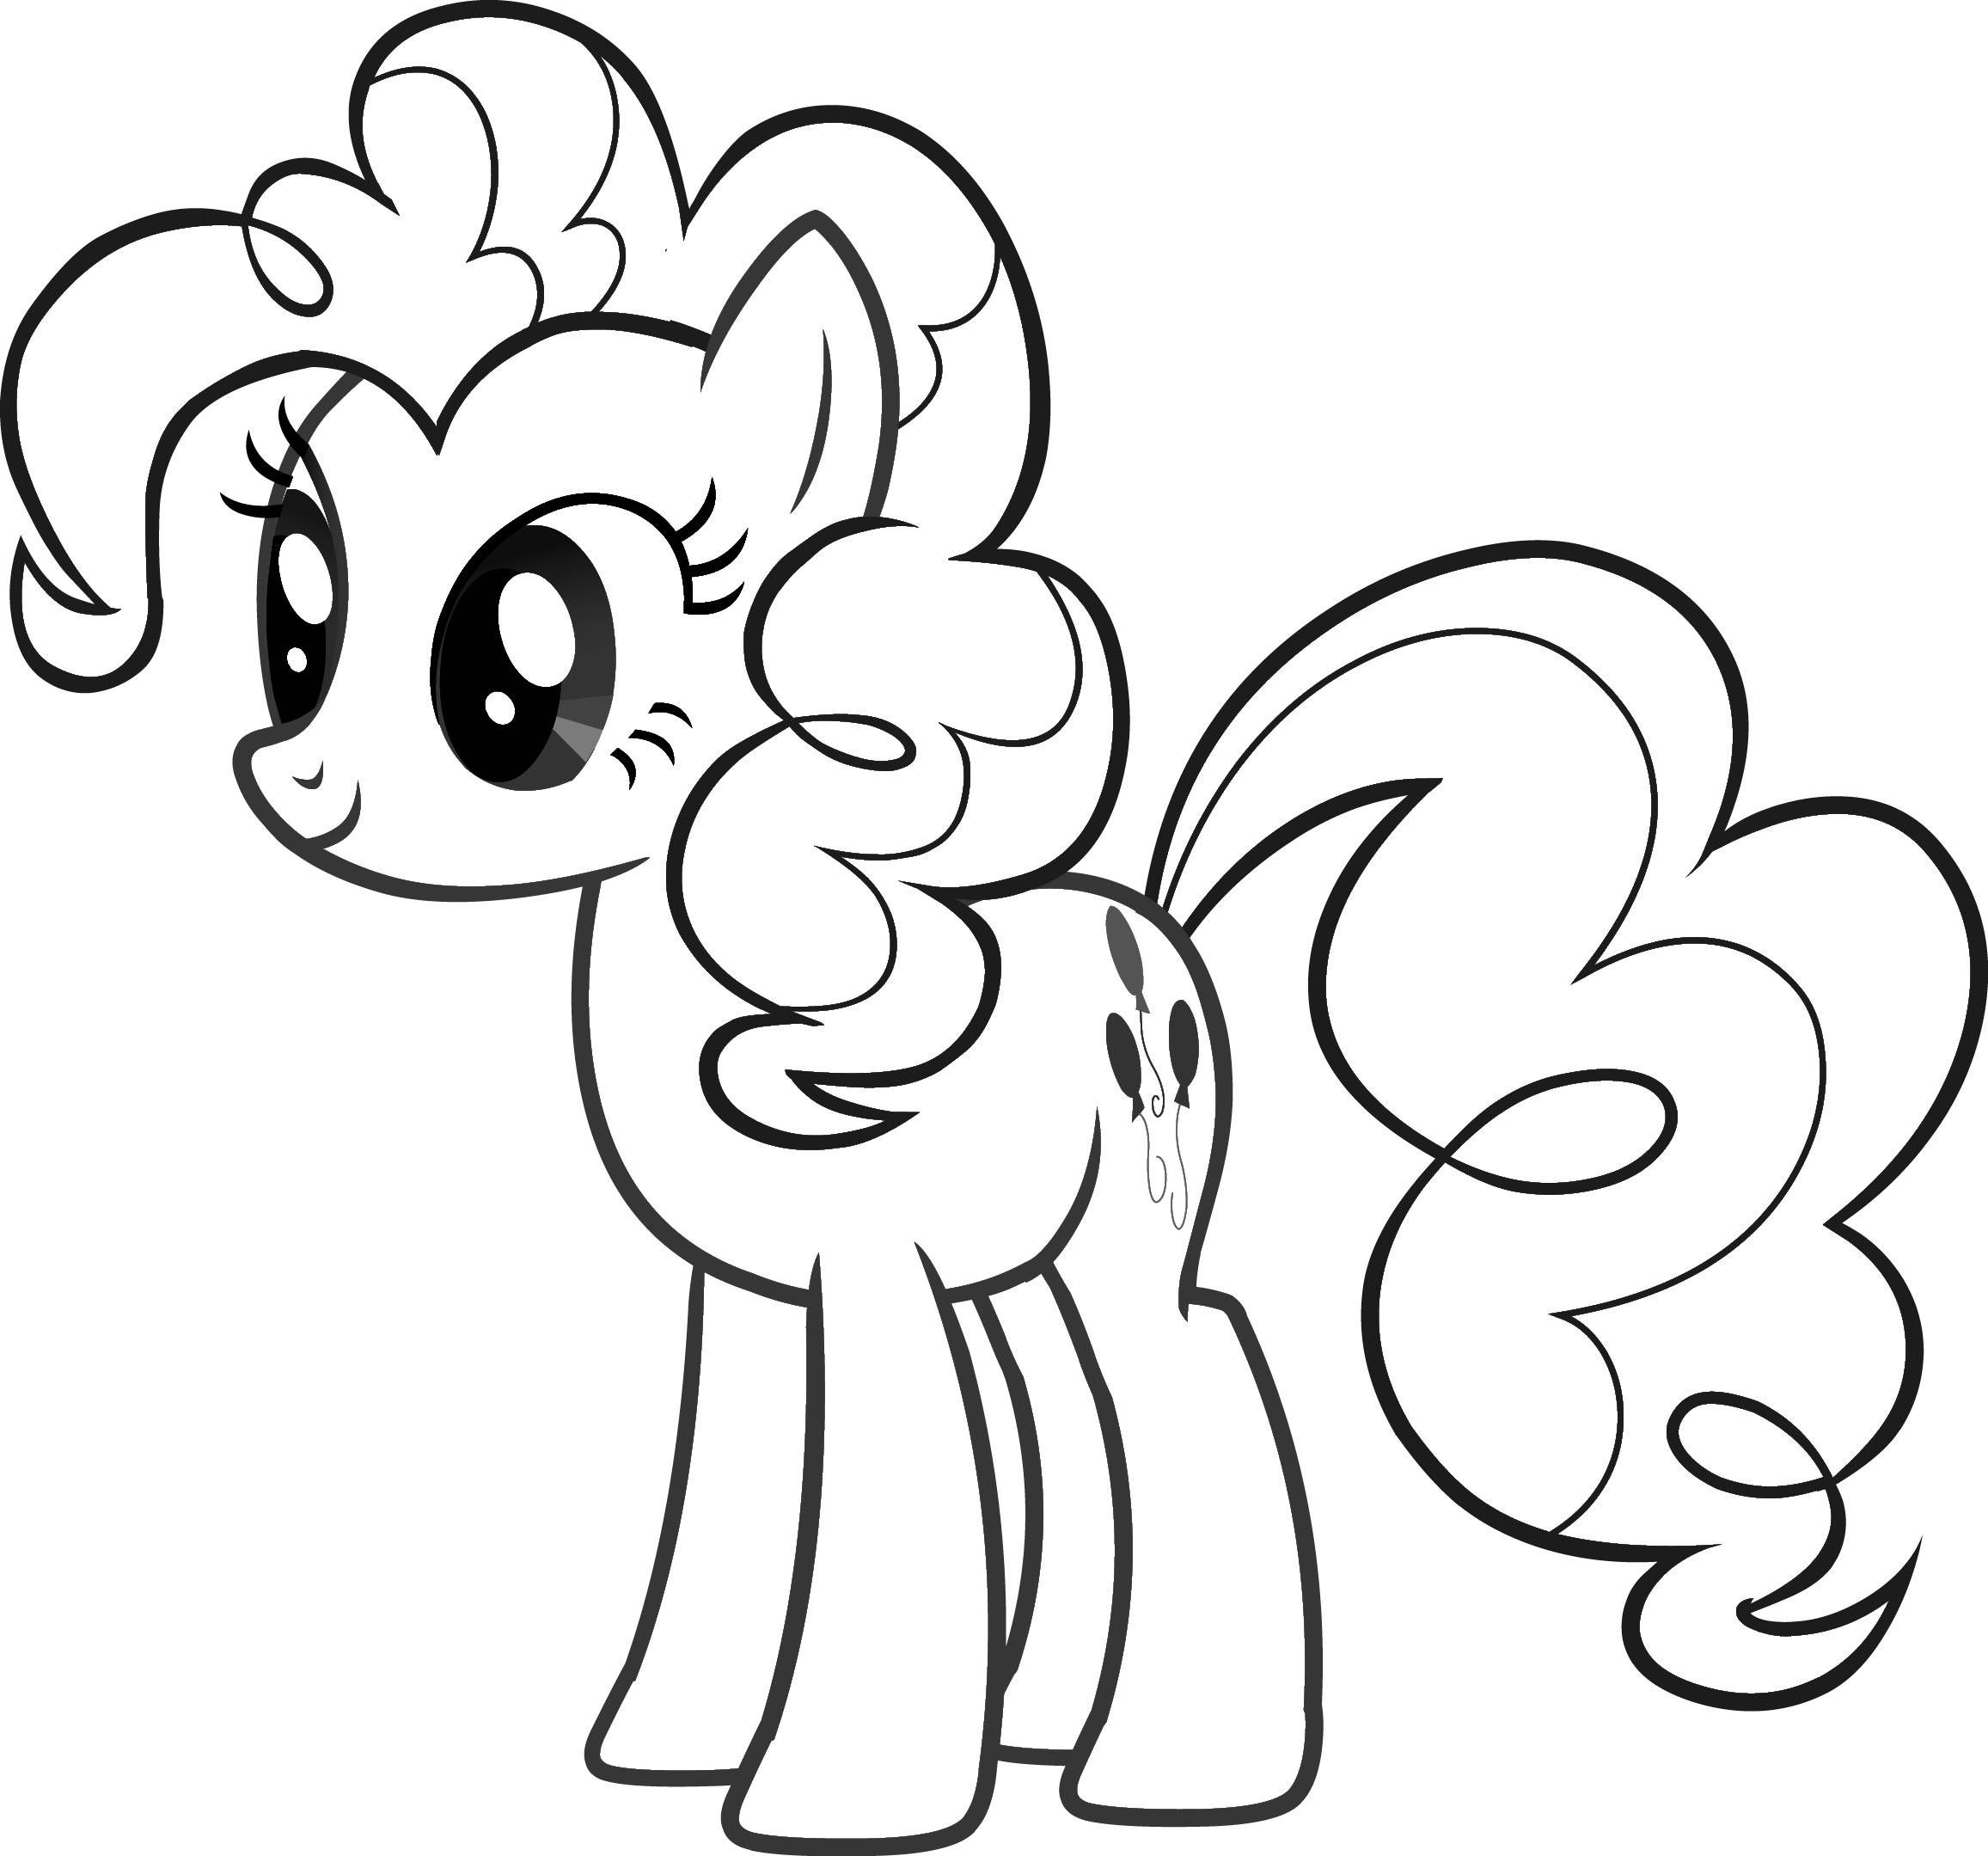 Free Printable My Little Pony Coloring Pages For Kids | Coloring - Free Printable Coloring Pages Of My Little Pony